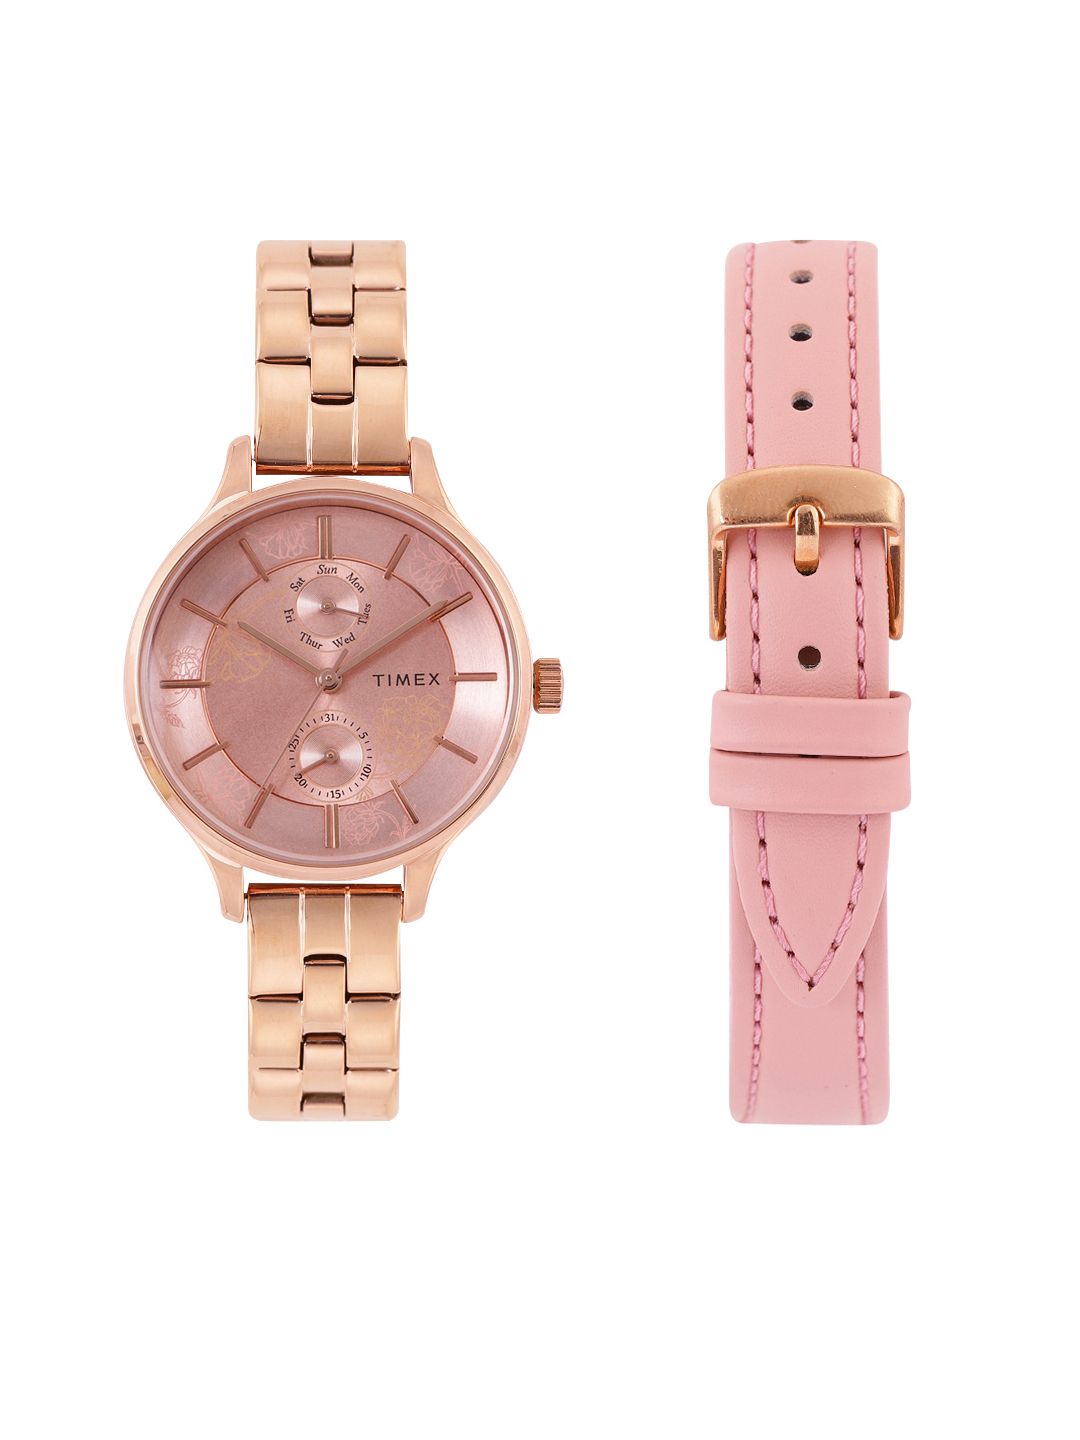 Timex Women Pink Analogue Watch TWEL14804 Price in India